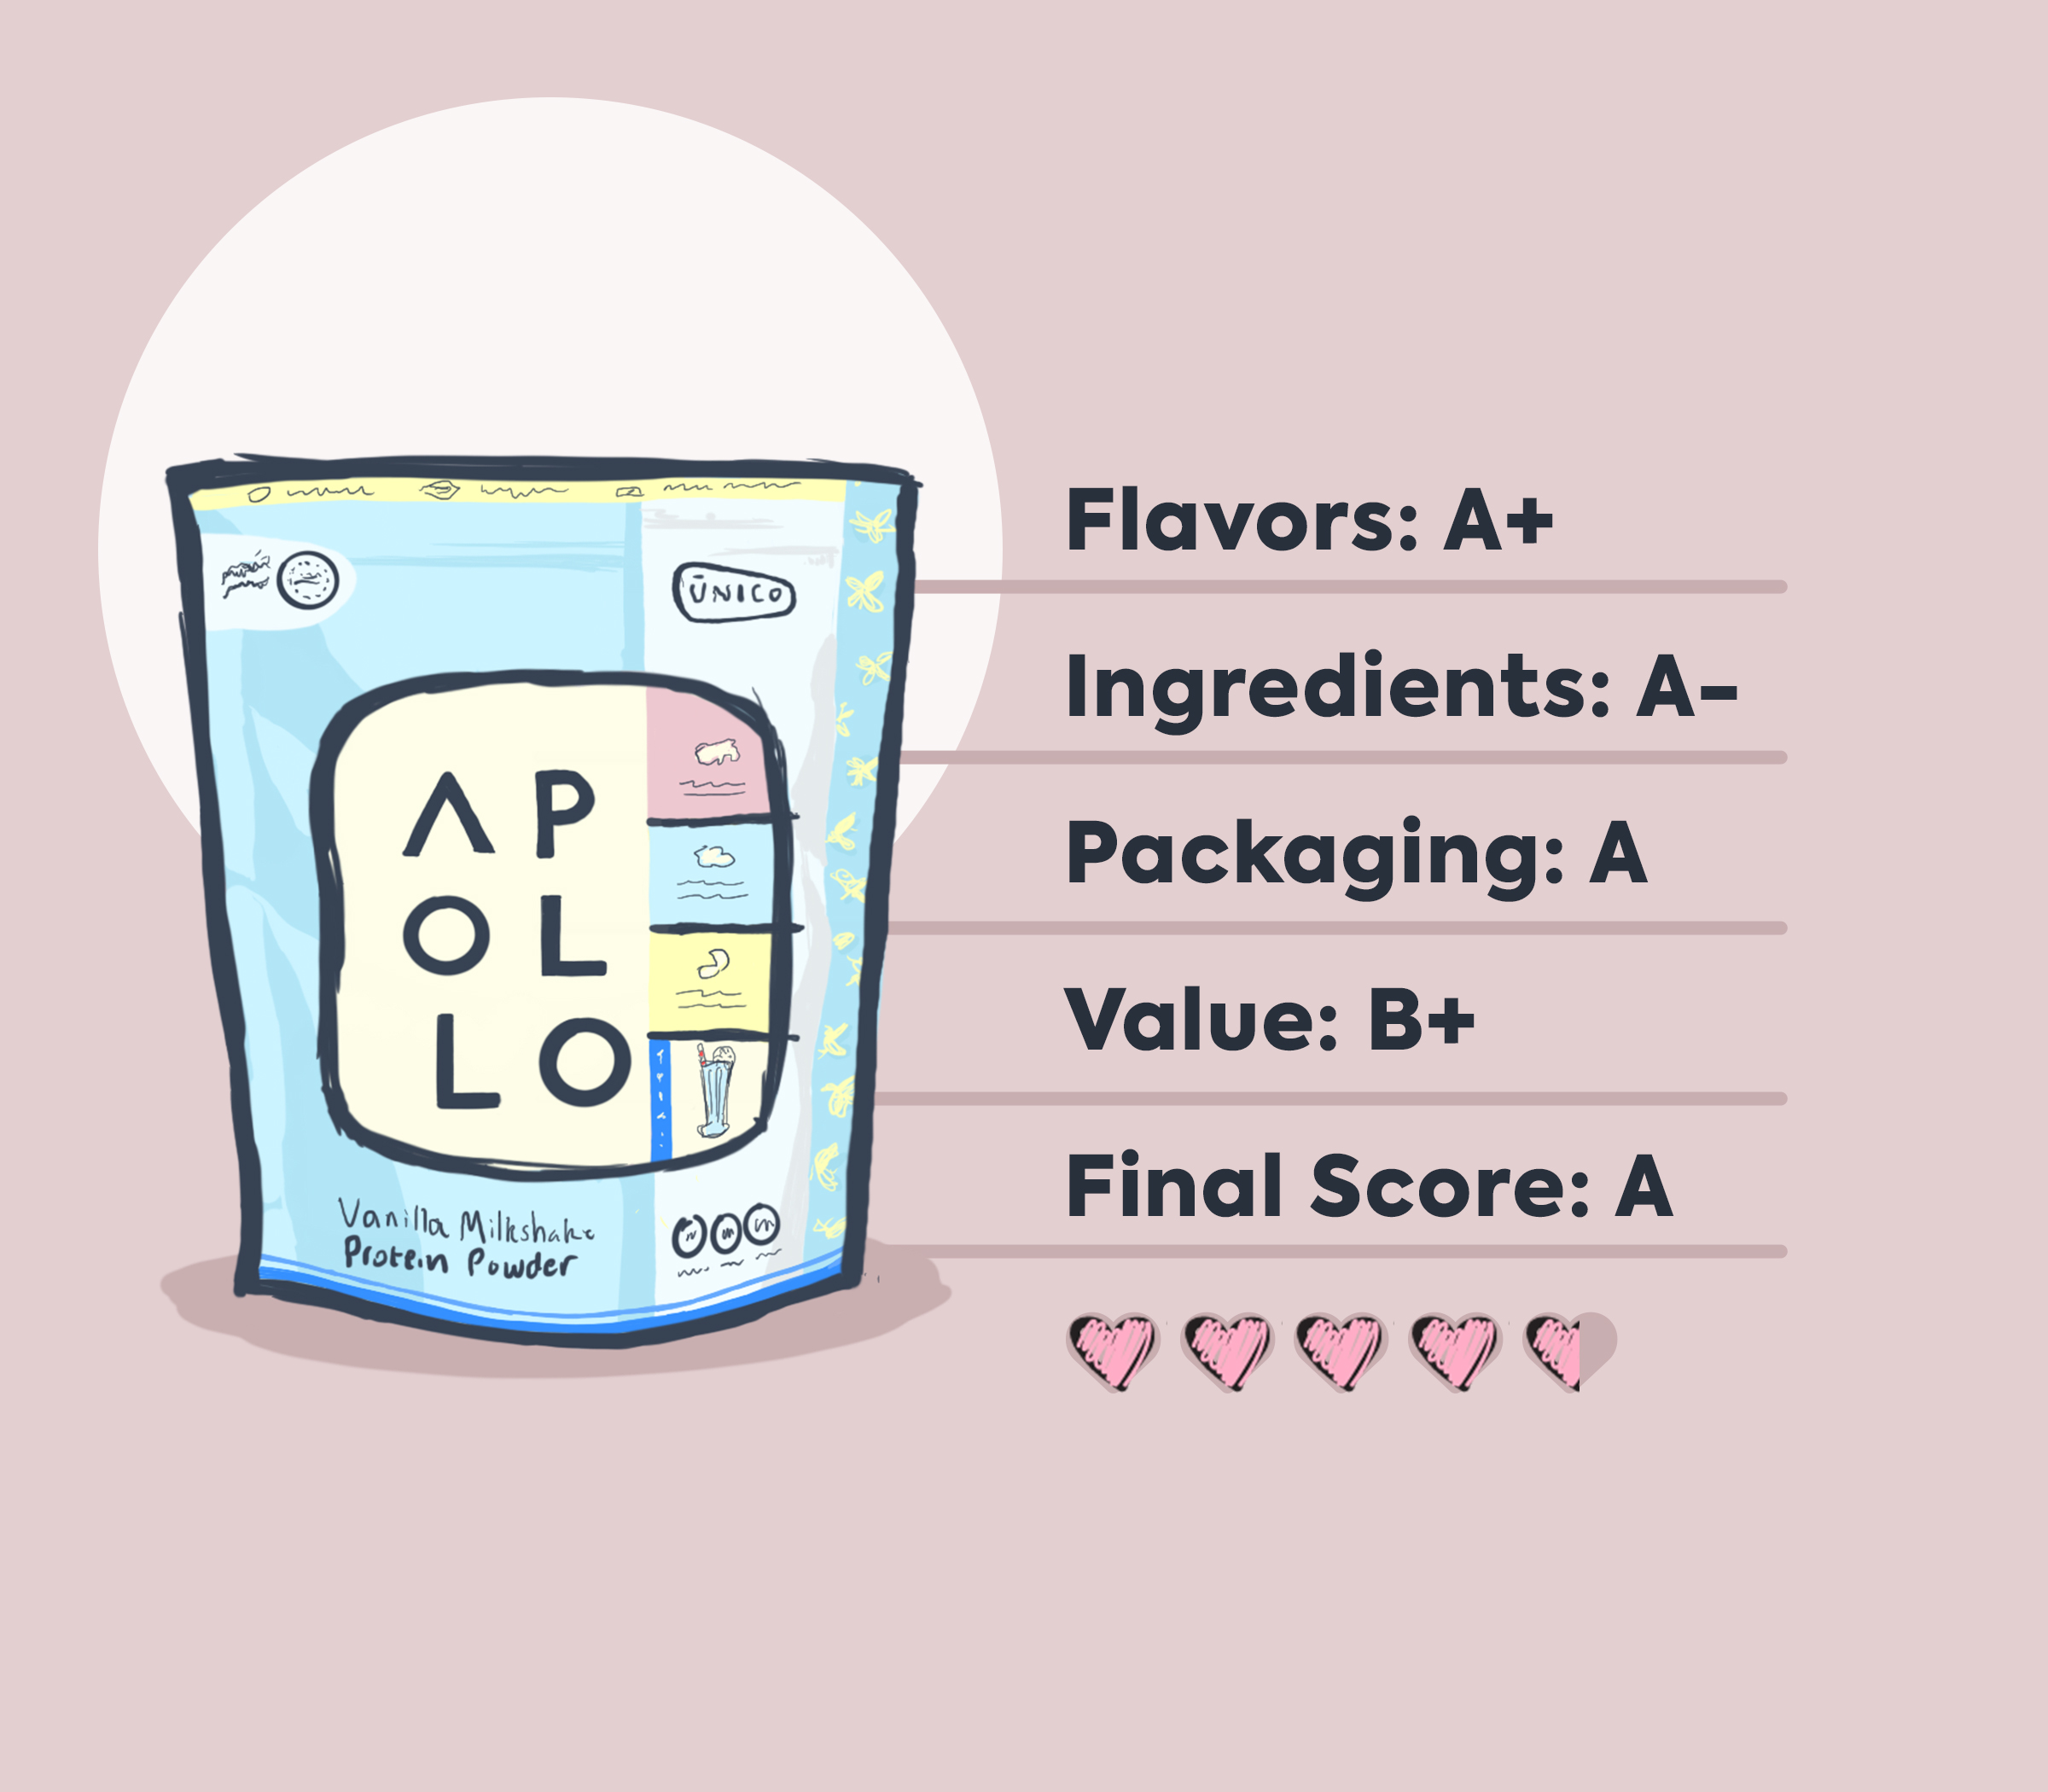 apollo protein packaging illustration with review summary data and information. Blue vanilla flavor is featured, with a dusty rose-colored. background